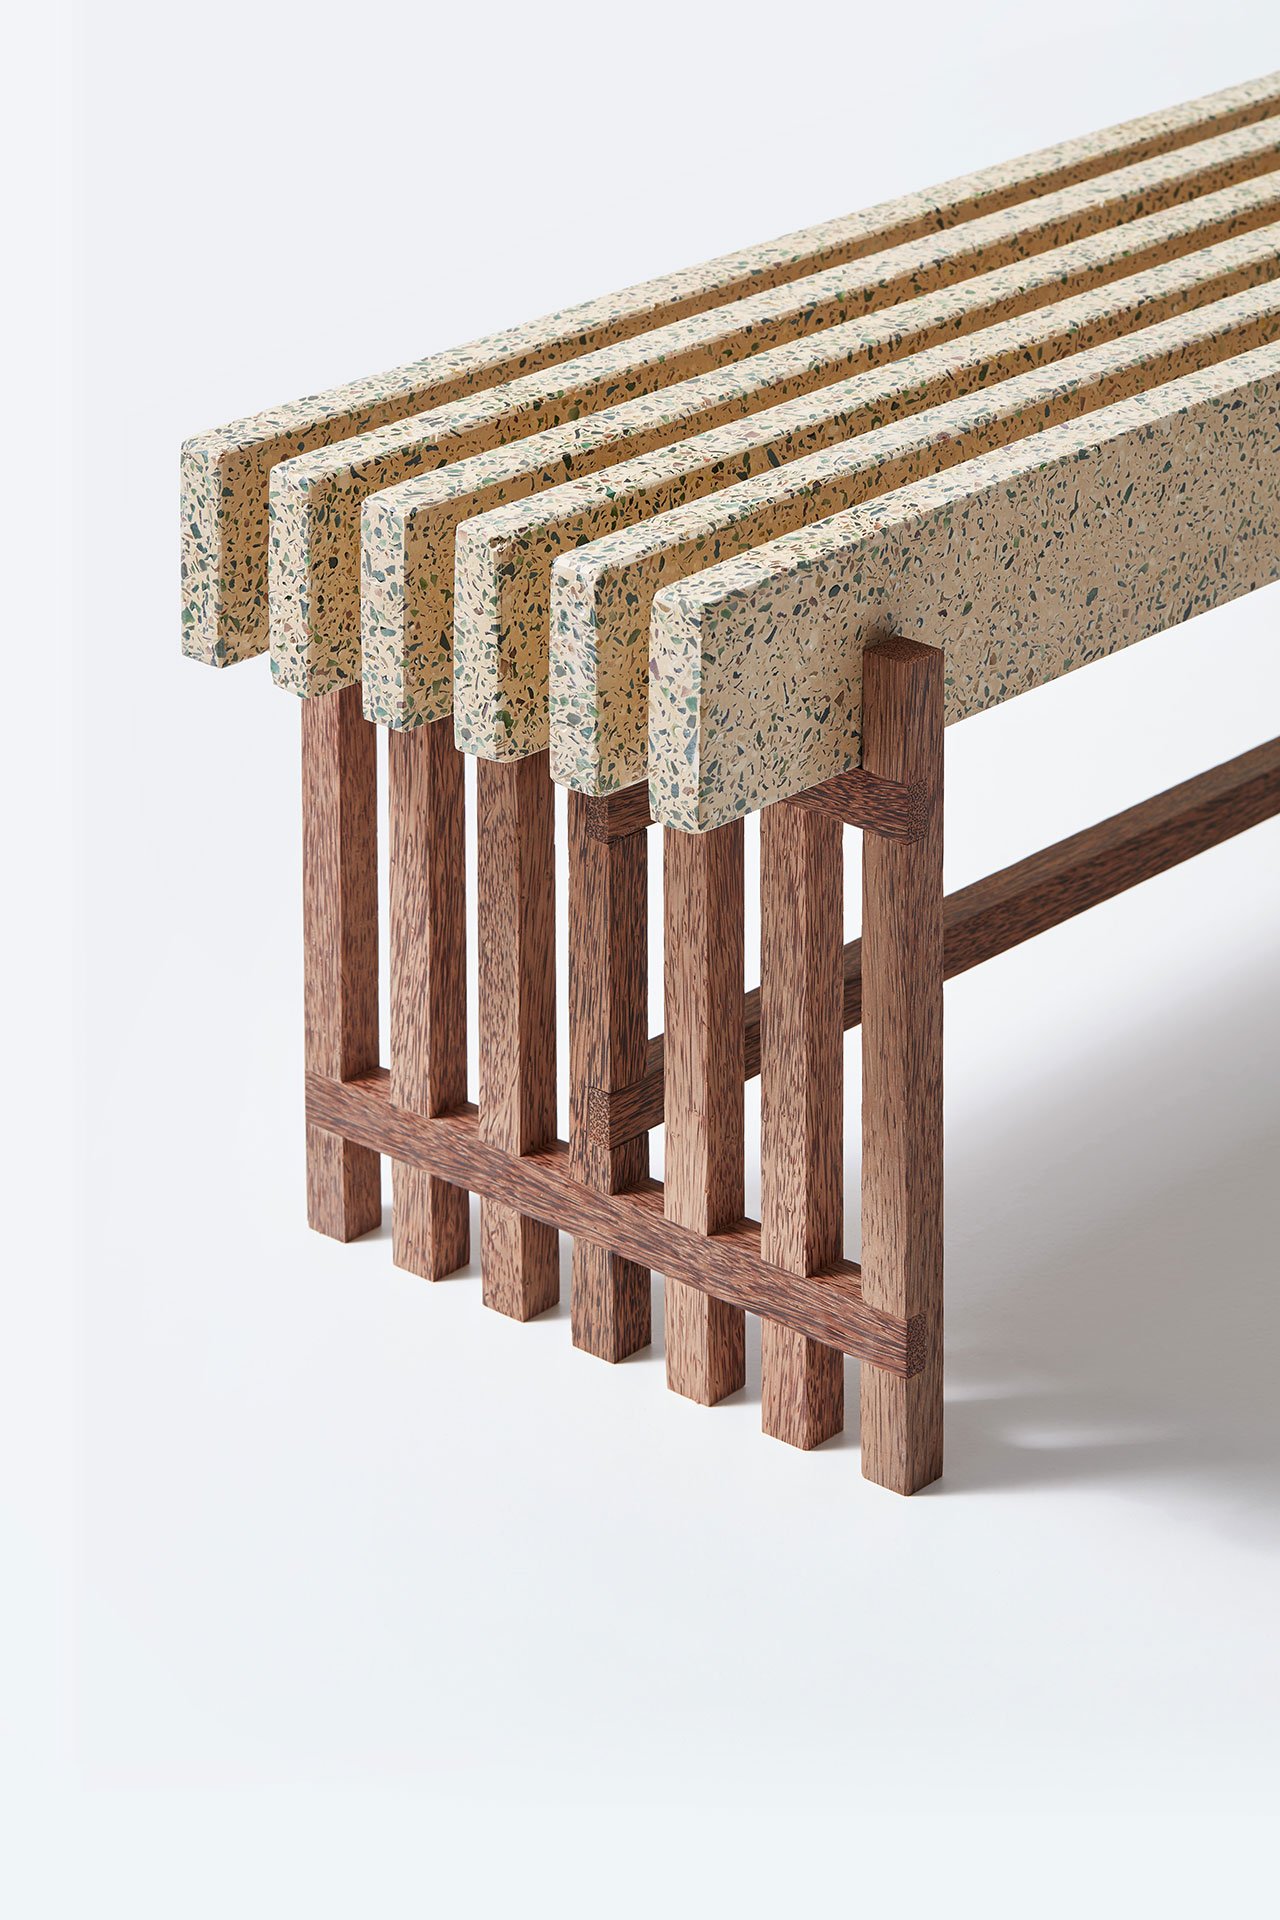 LAZY | AFTERNOON bench from Trending Terrazzo collection by Bottle-up.